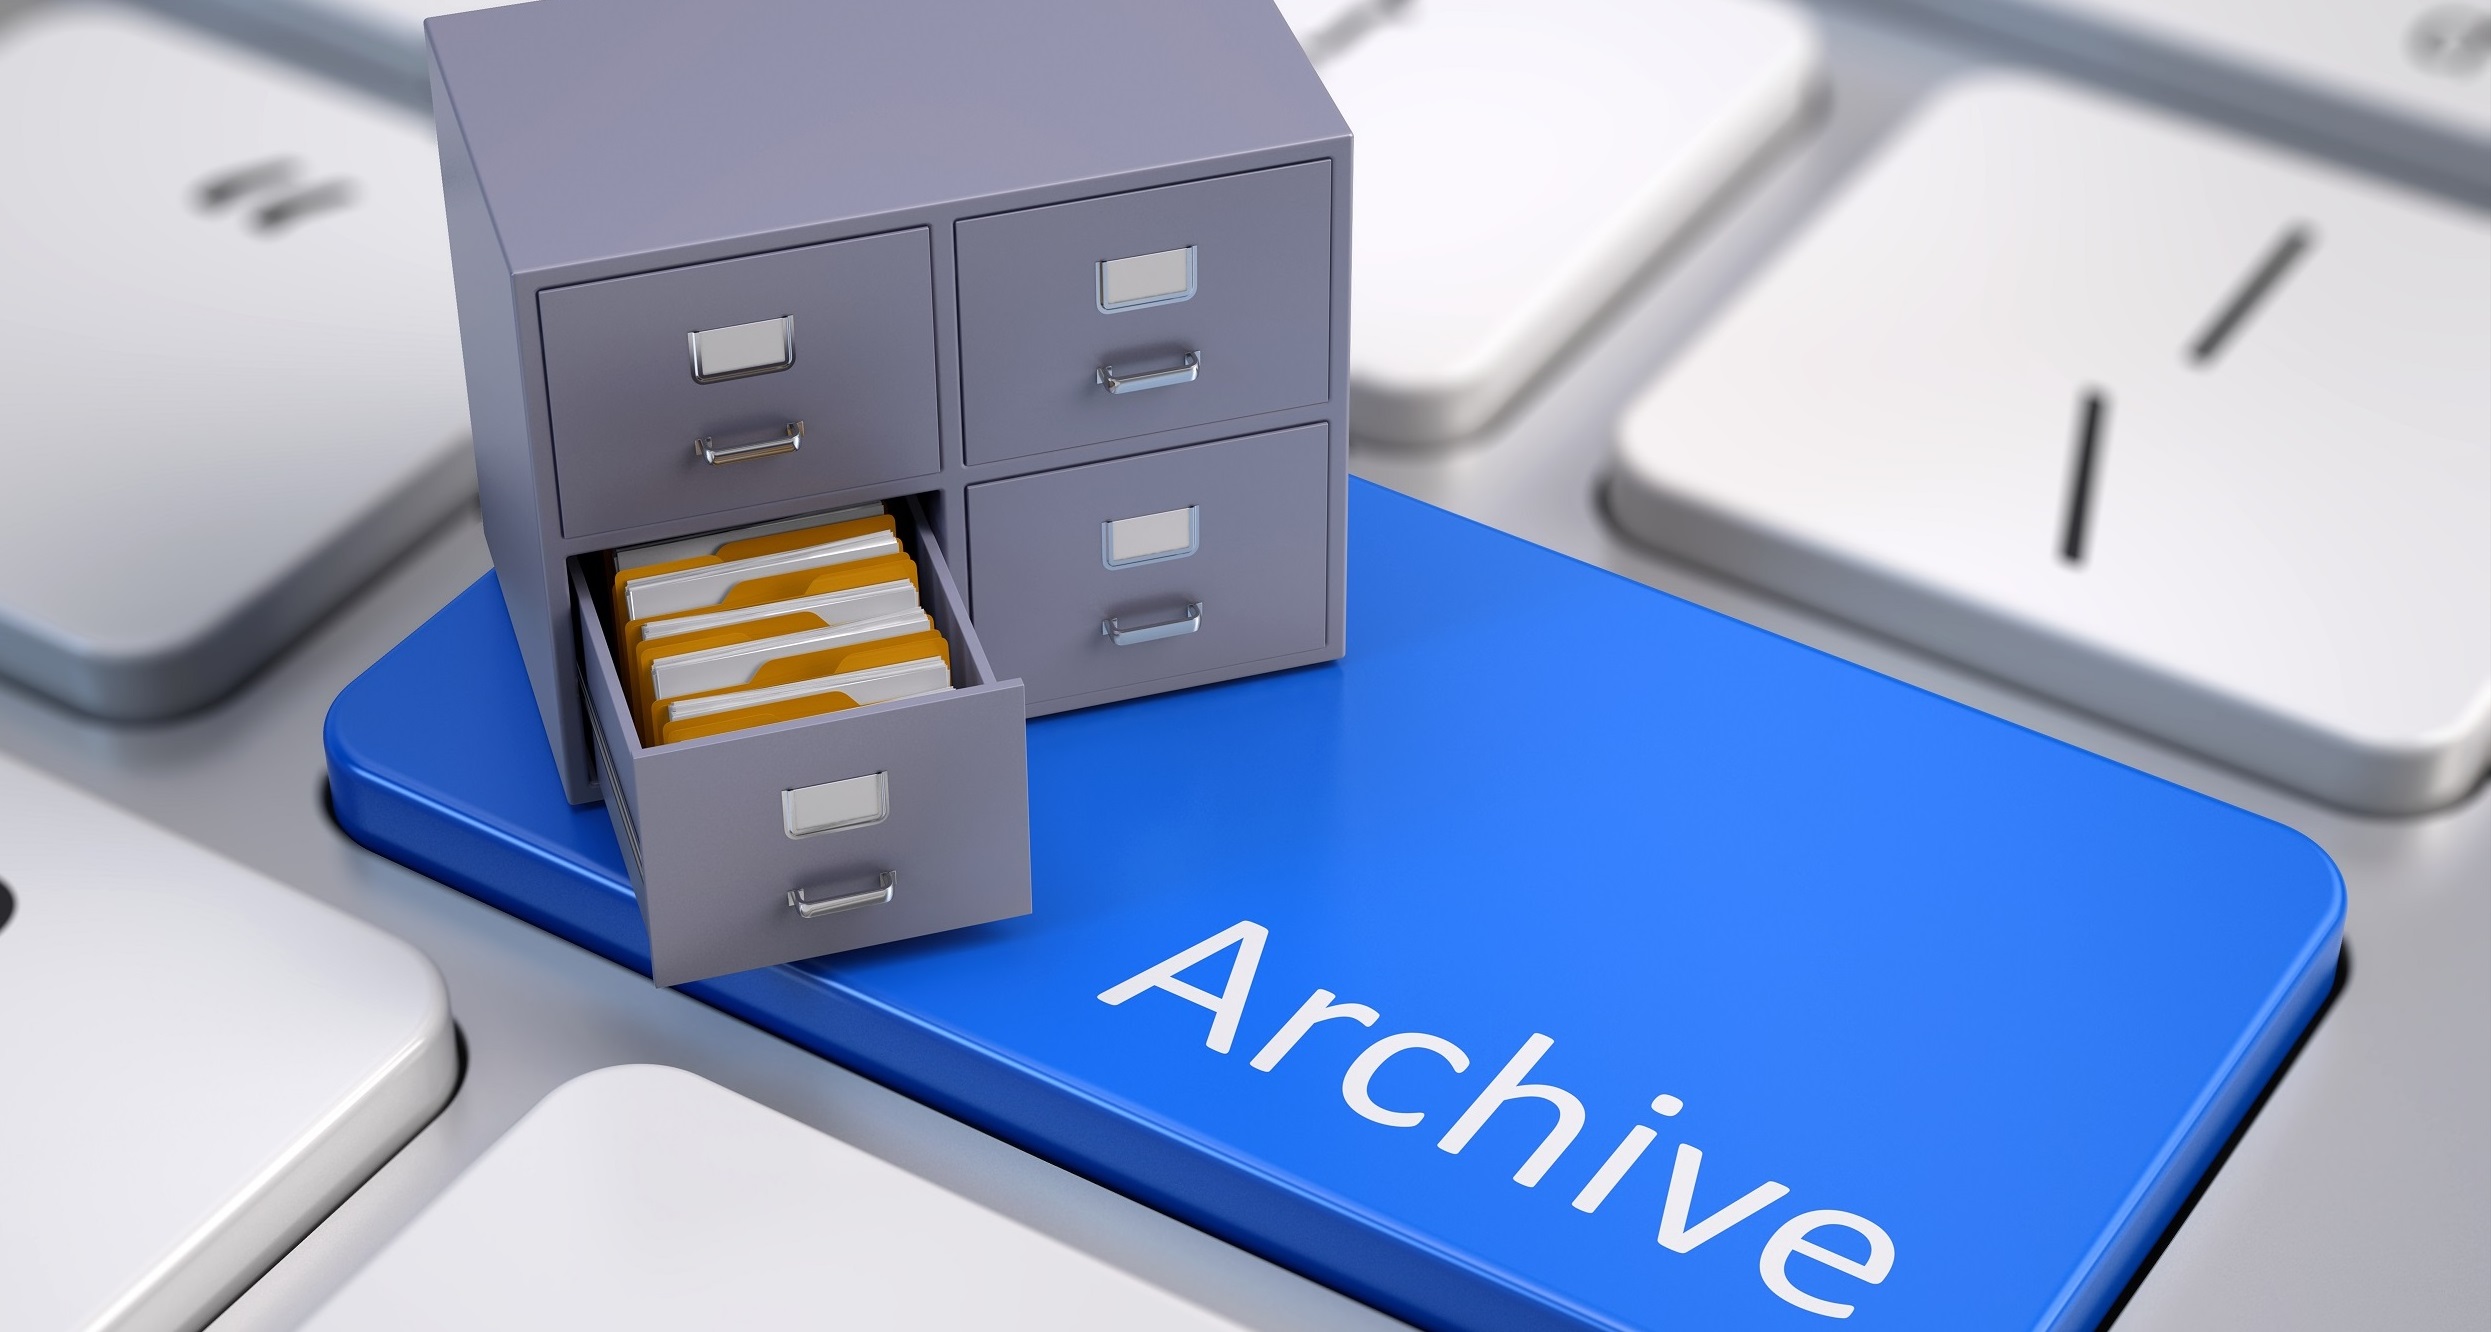 Archive Office Mailboxes With Online Backup